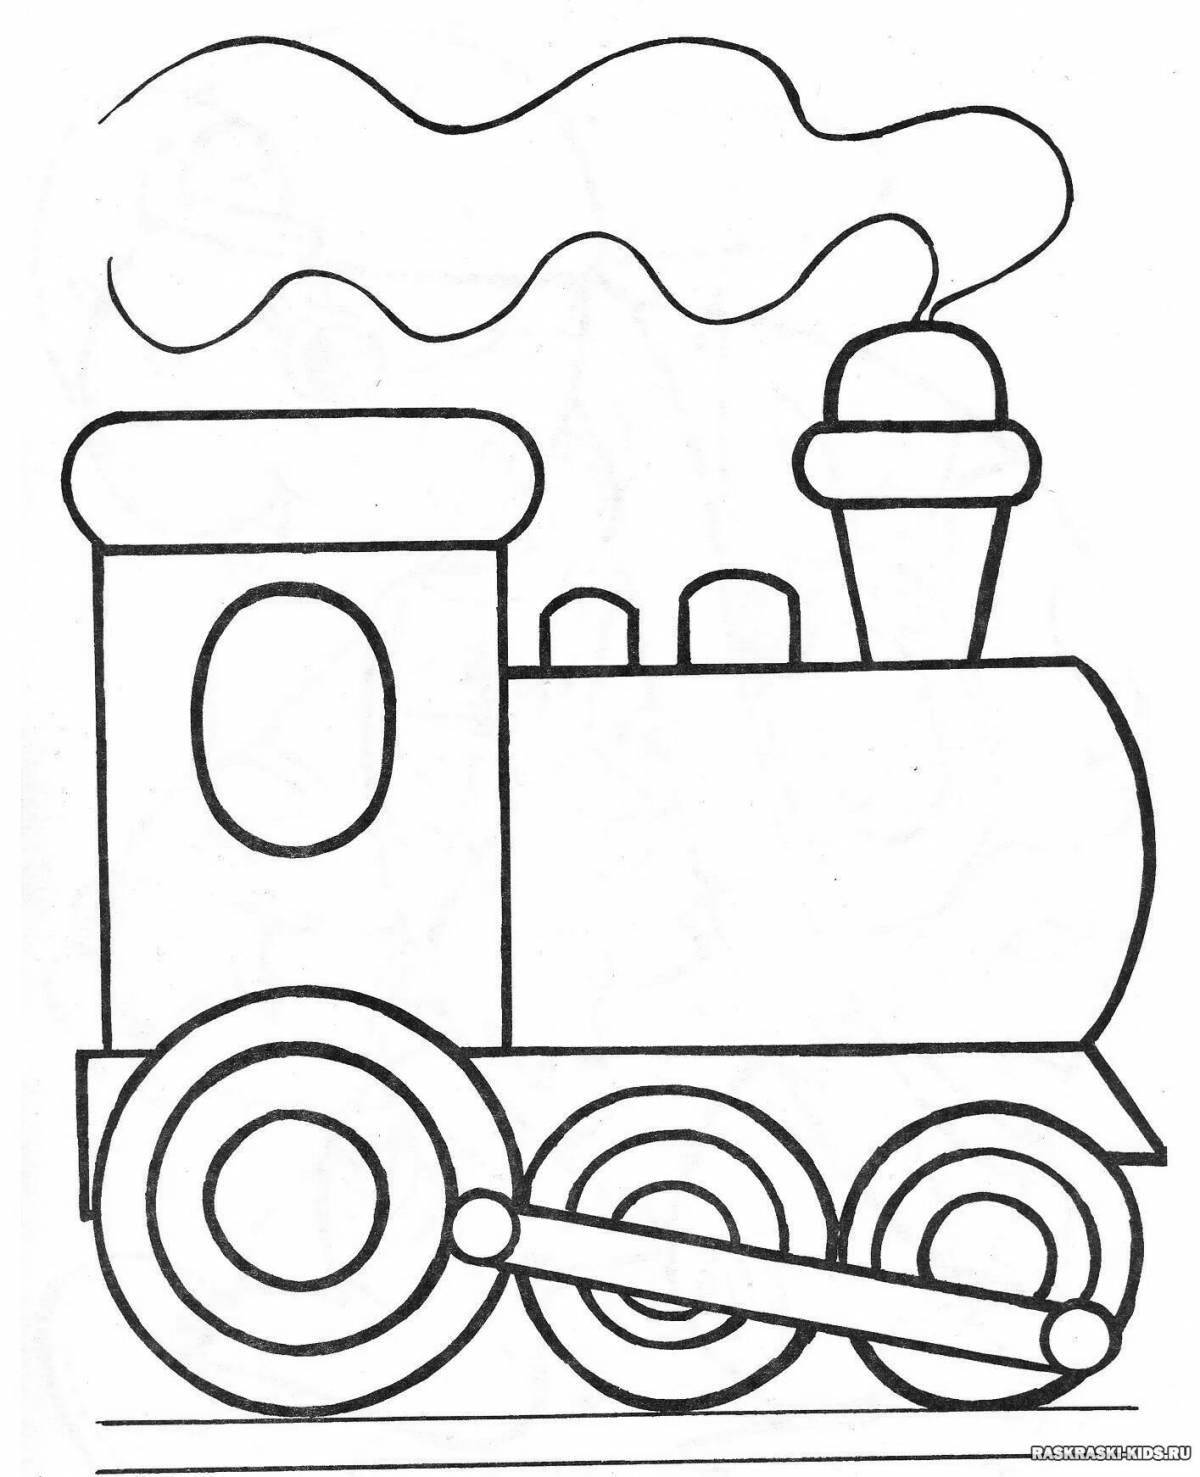 Colour-fun coloring page 2 for boys